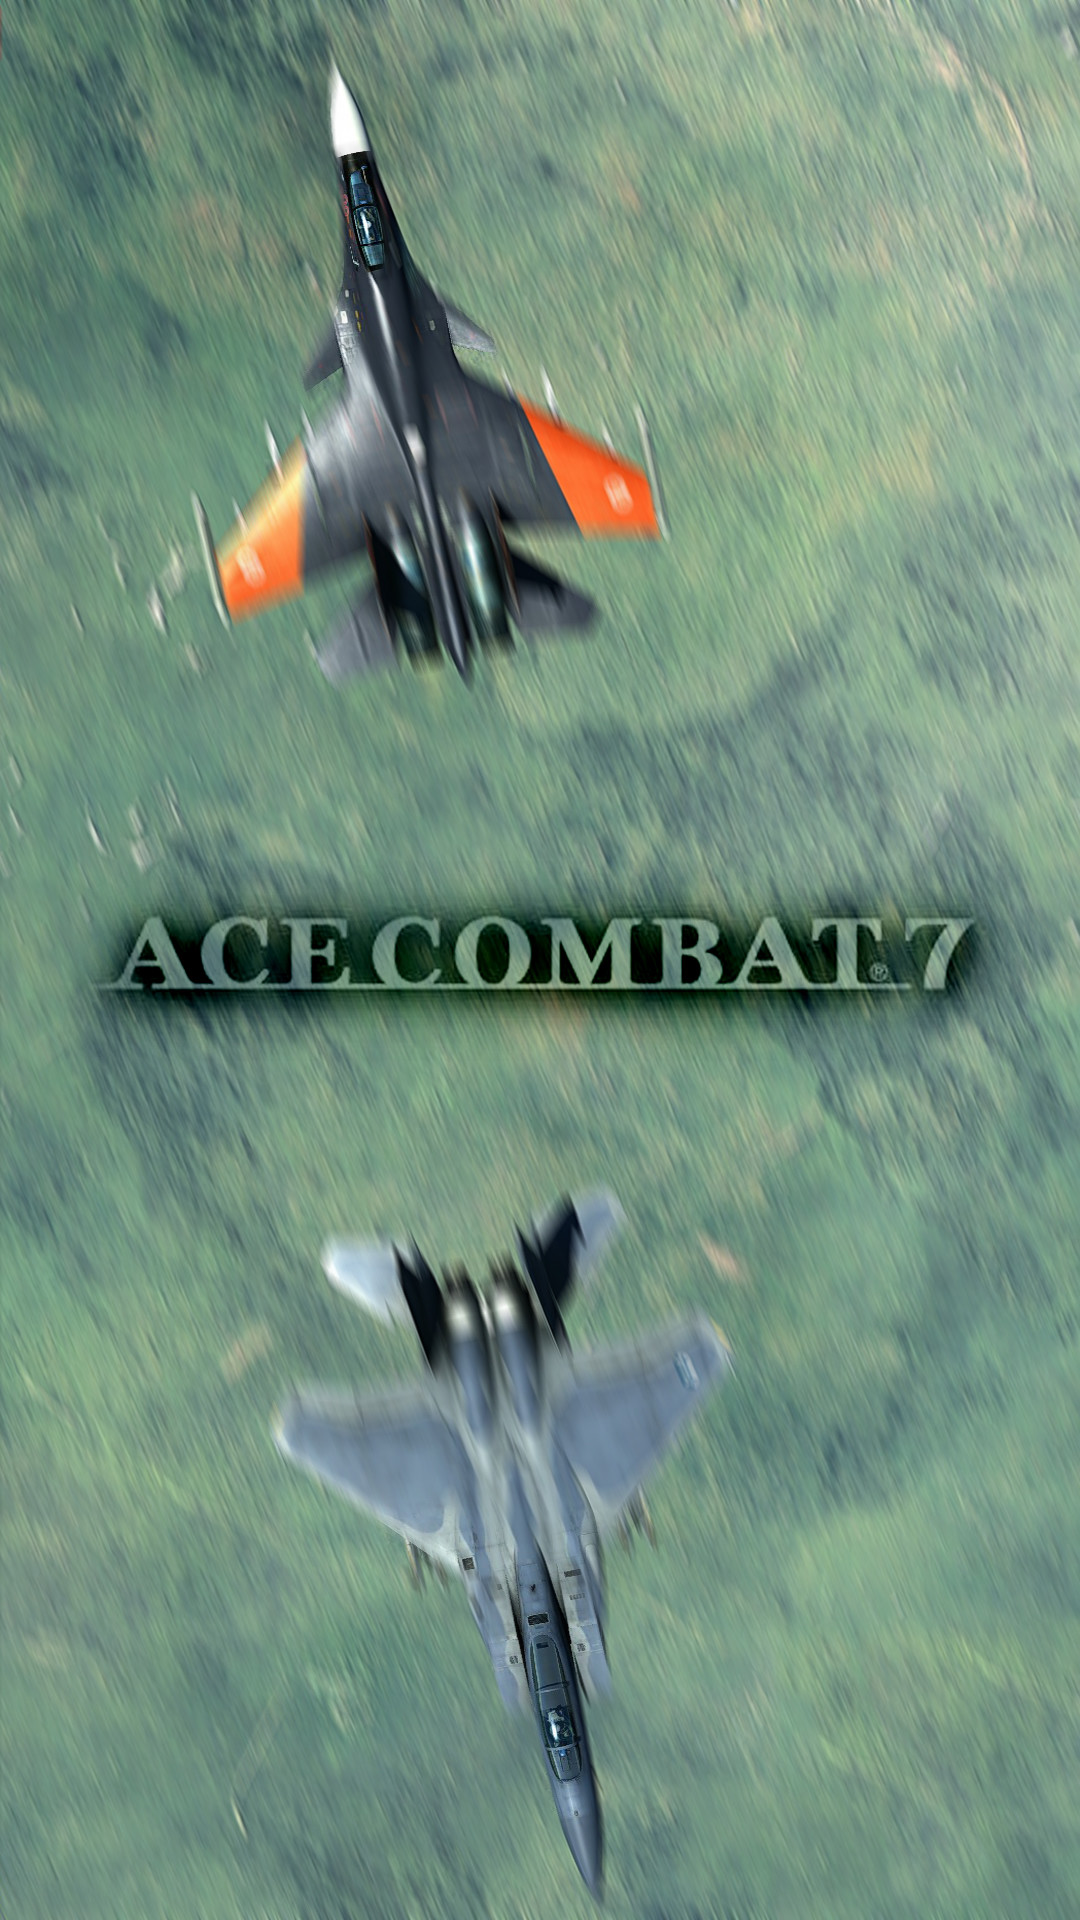 1080x1920 ... ACE COMBAT 7 Wallpaper #2 by BillyM12345